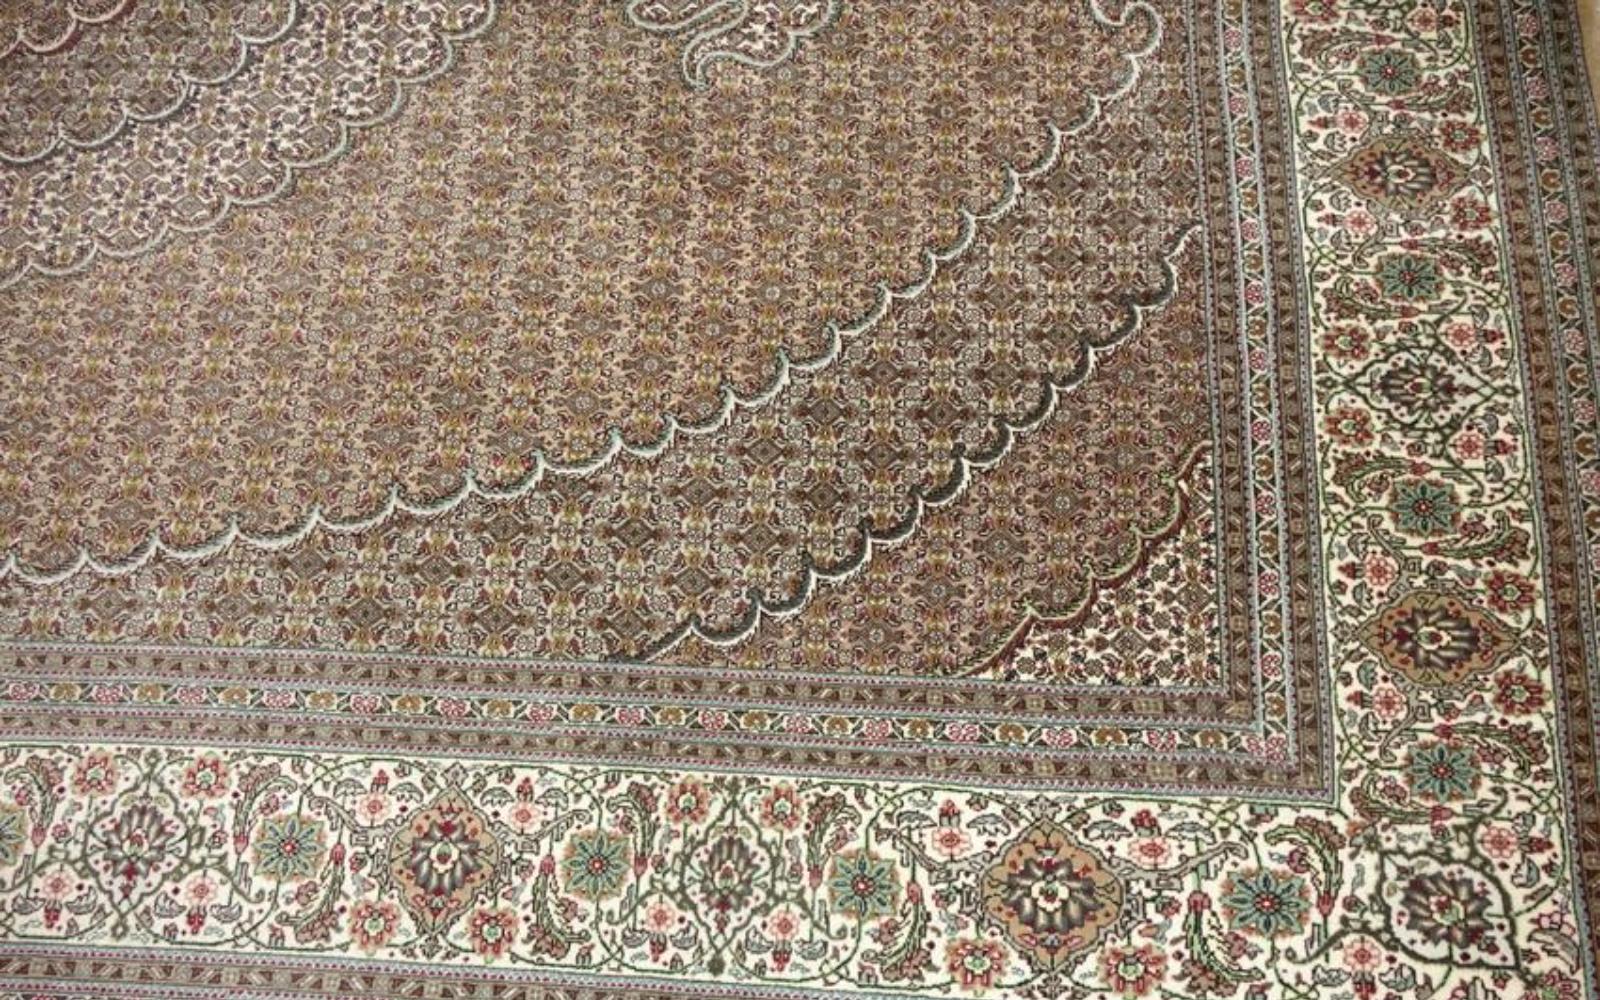 Very fine Persian Tabriz Silk & Wool - 7' 10' In Good Condition For Sale In Newmanstown, PA